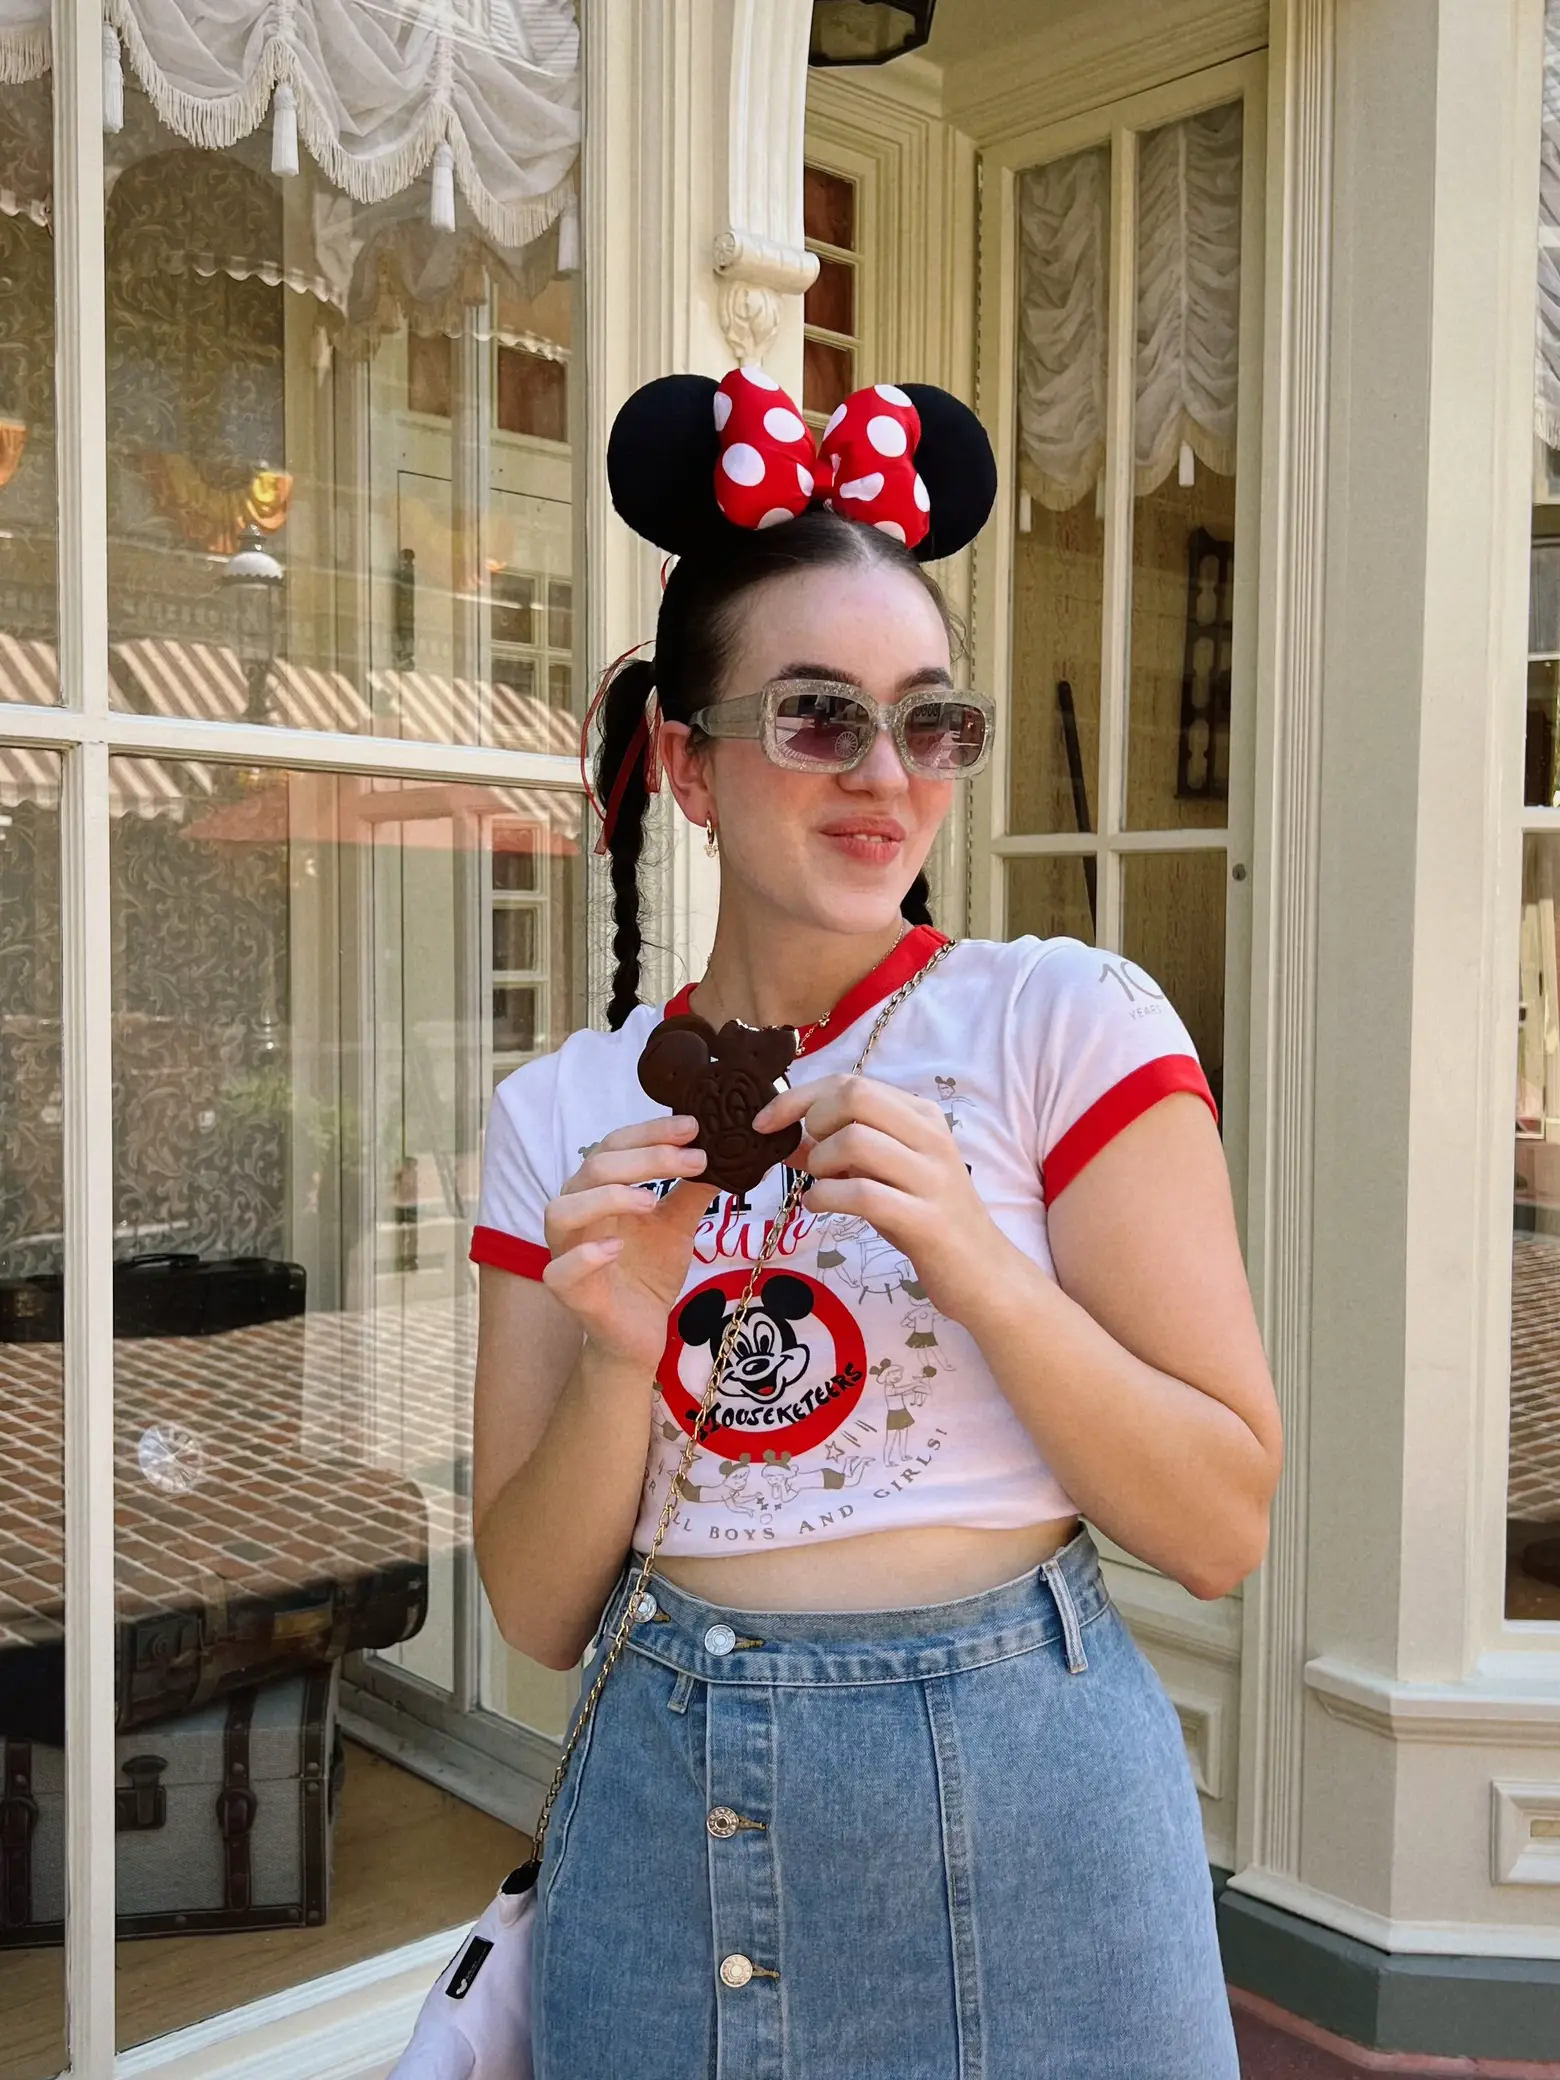  A woman wearing a Mickey Mouse shirt and jeans is holding a piece of chocolate cake.